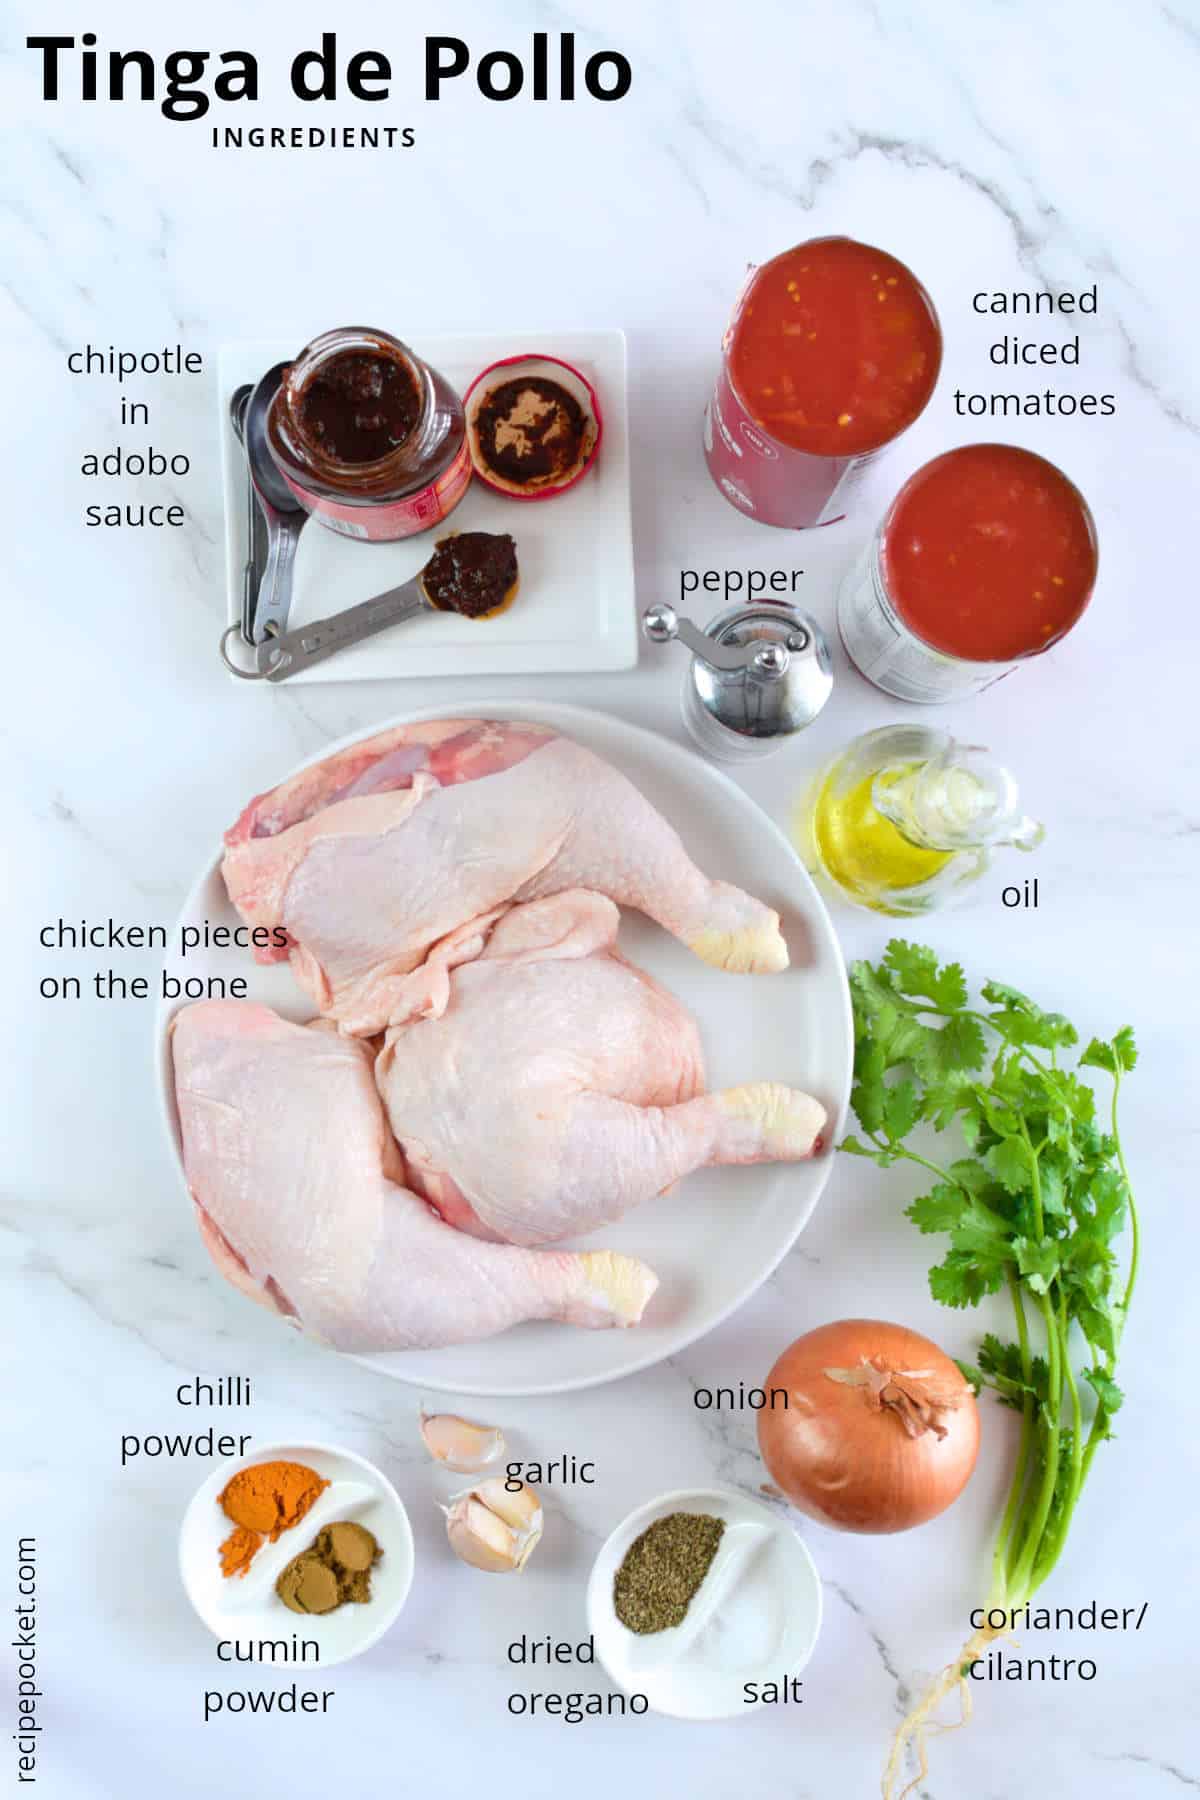 Image of ingredients for shredded chicken in tomato sauce.